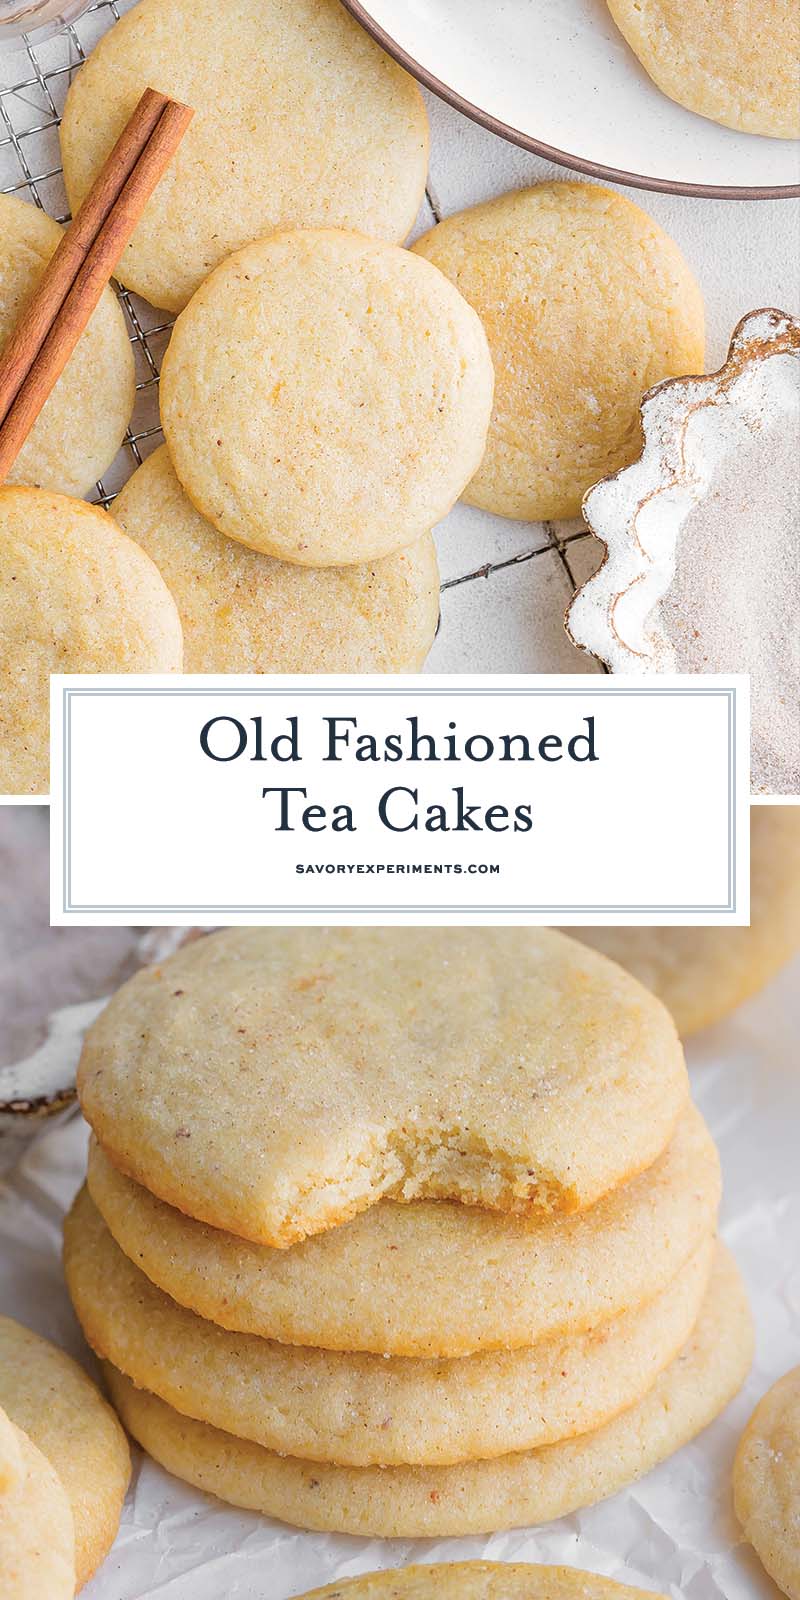 collage of old fashioned tea cakes with text overlay